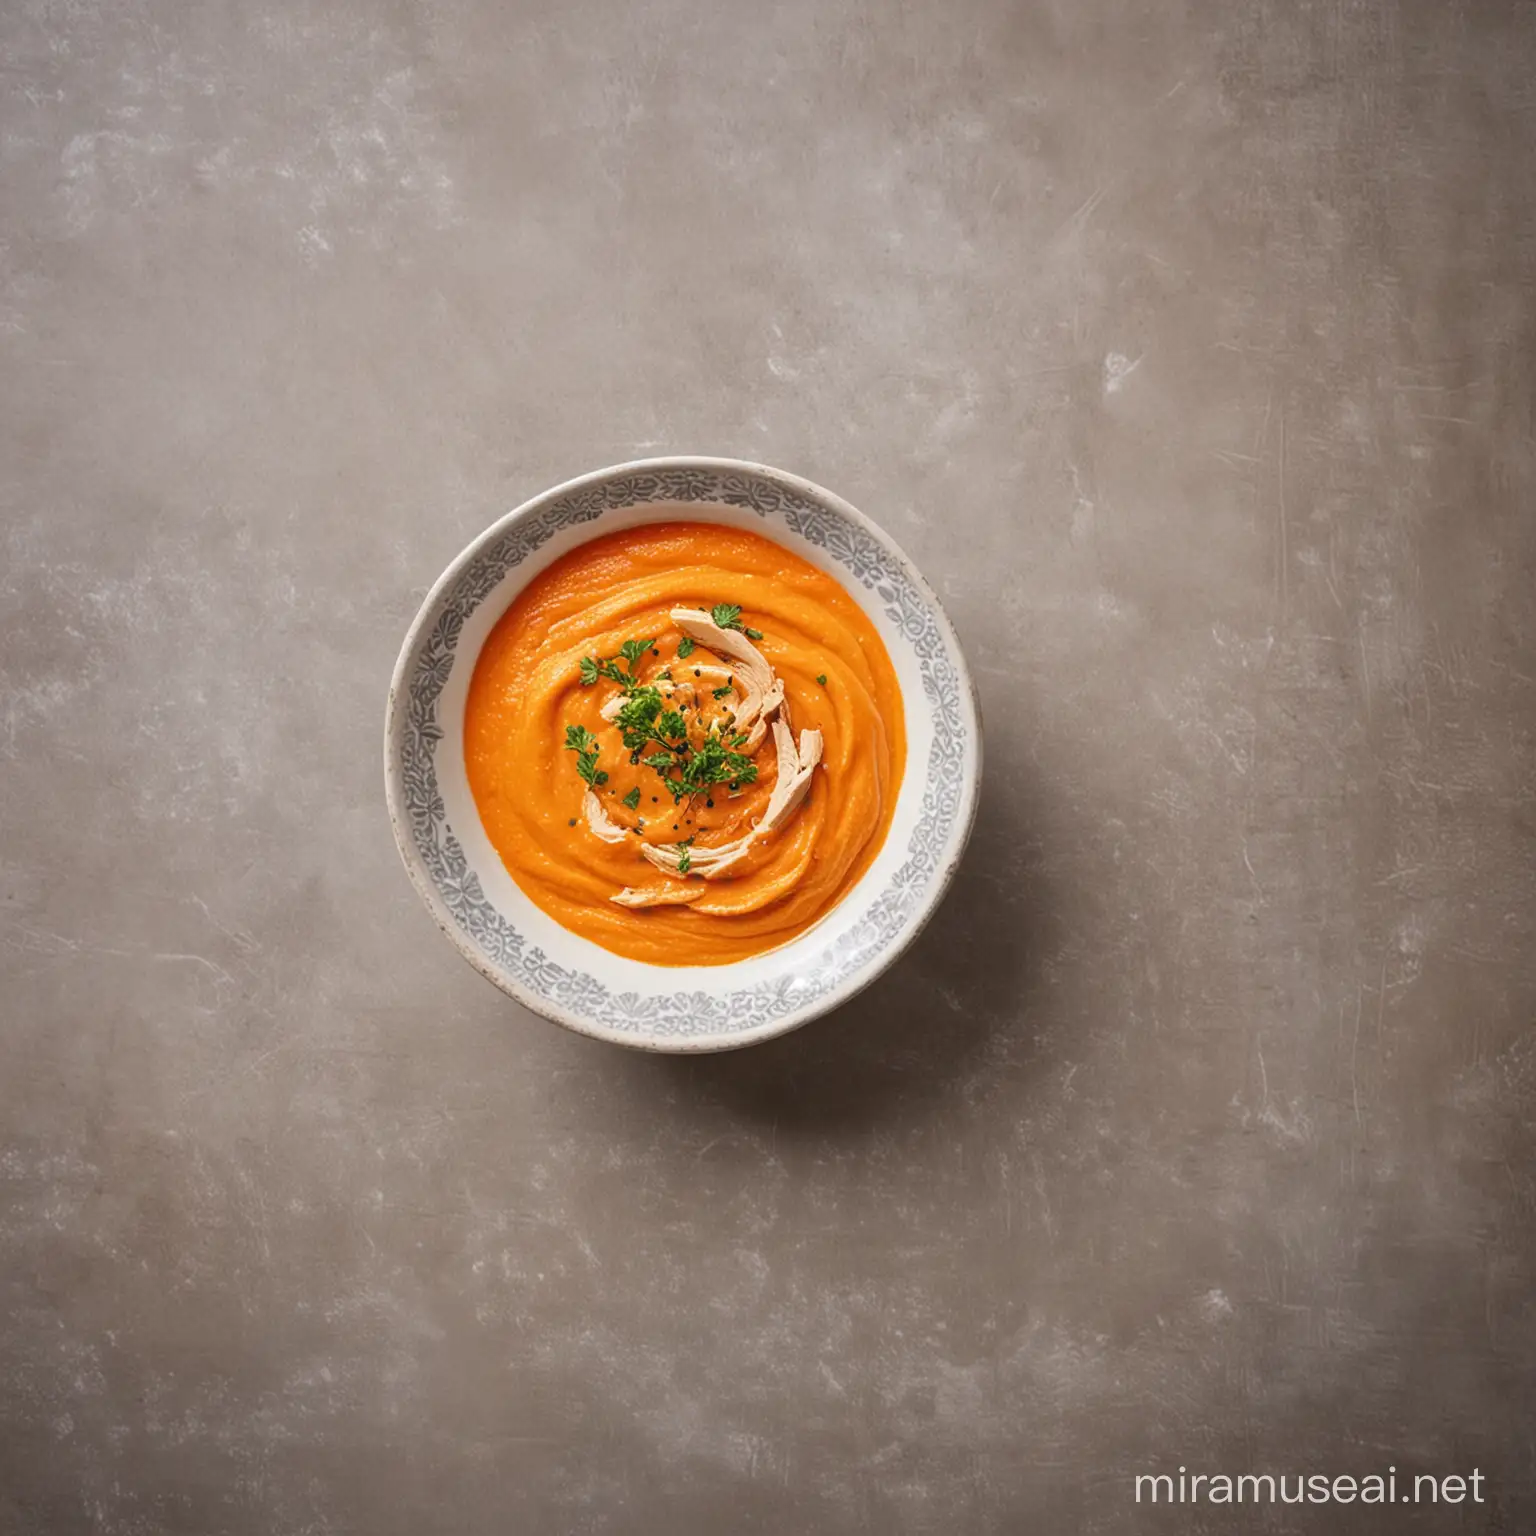 Healthy Chicken and Carrot Puree Recipe in a Ceramic Bowl